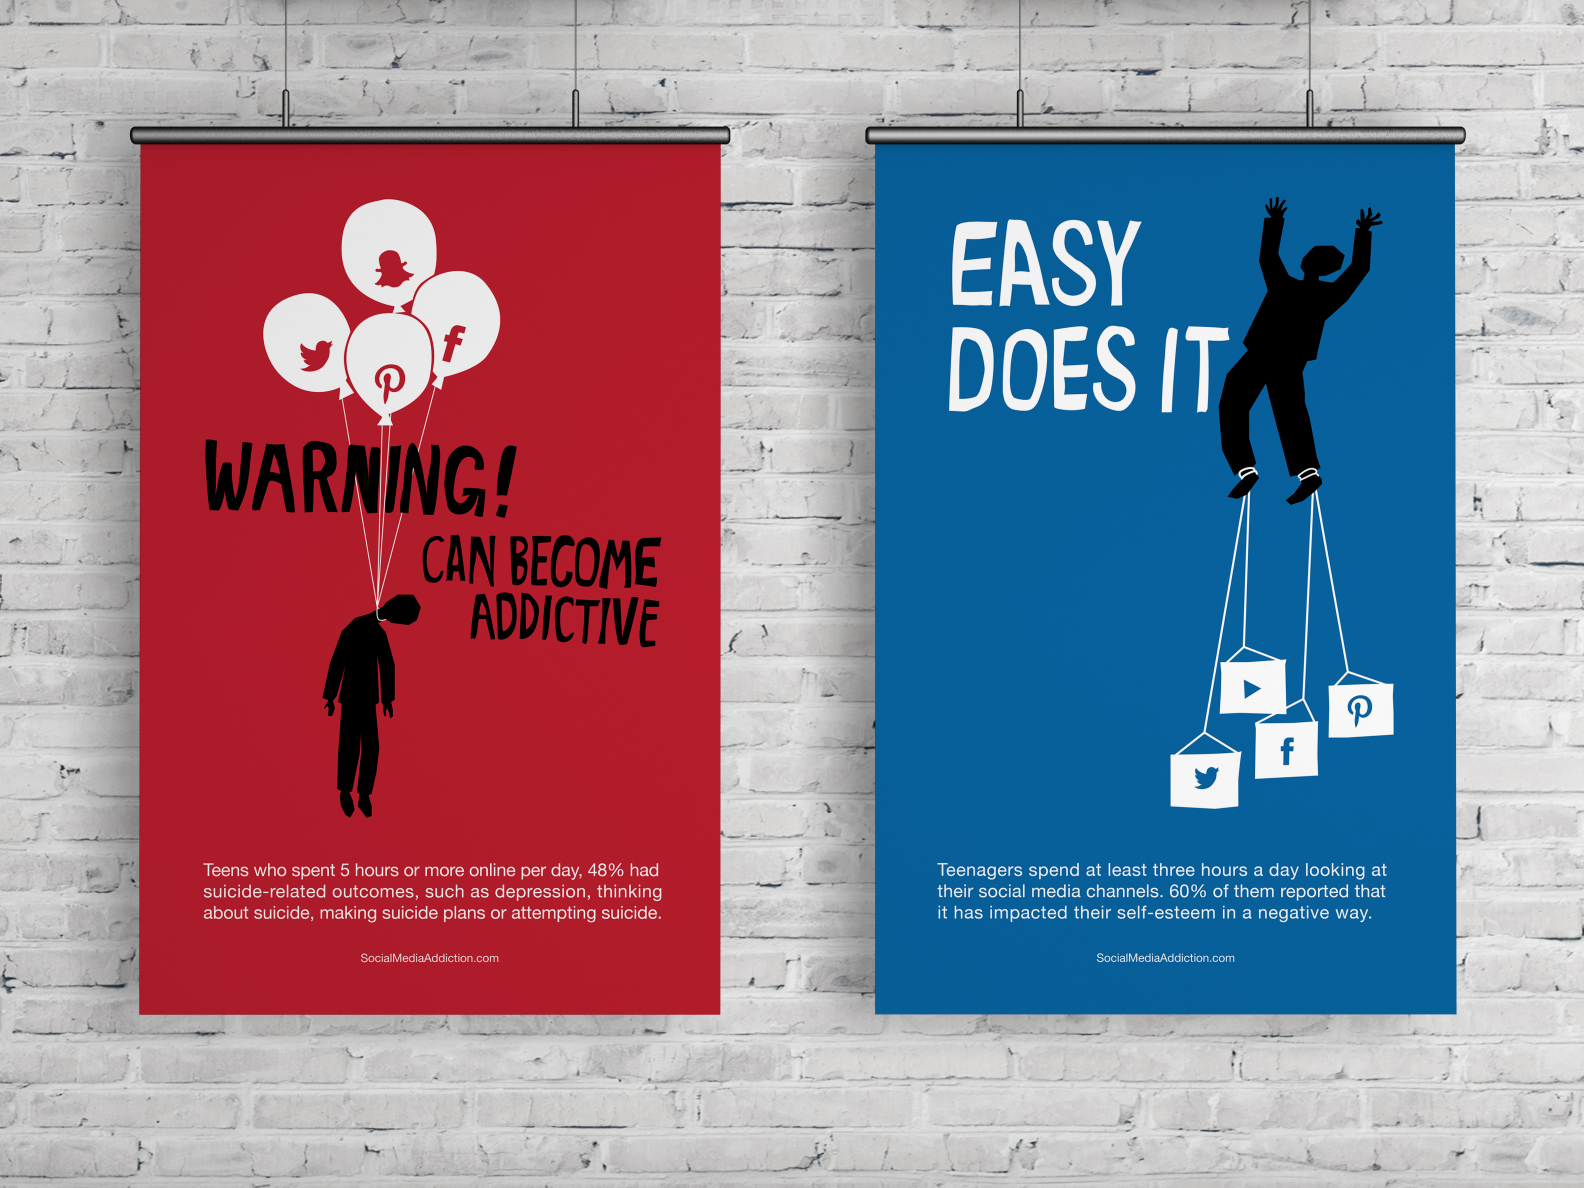 Social Media Addiction Campaign Poster Set Design By Lilifangdesign On